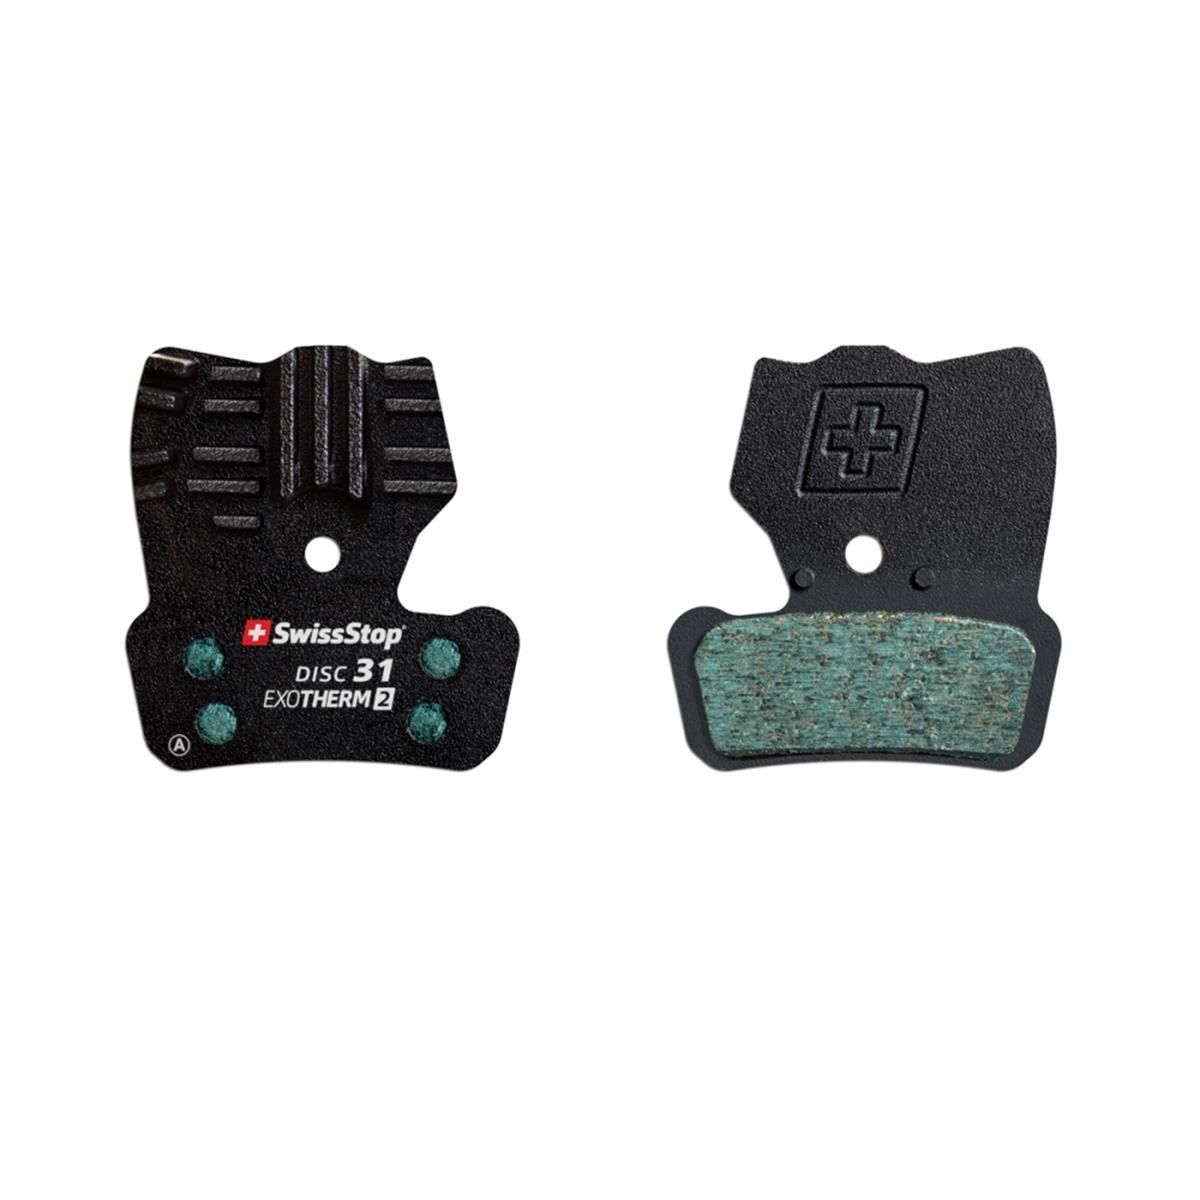 SwissStop MTB Disc Brake Pad DISC31EXO EXOTherm2, For Avid X0, Elixier & SRAM Guide